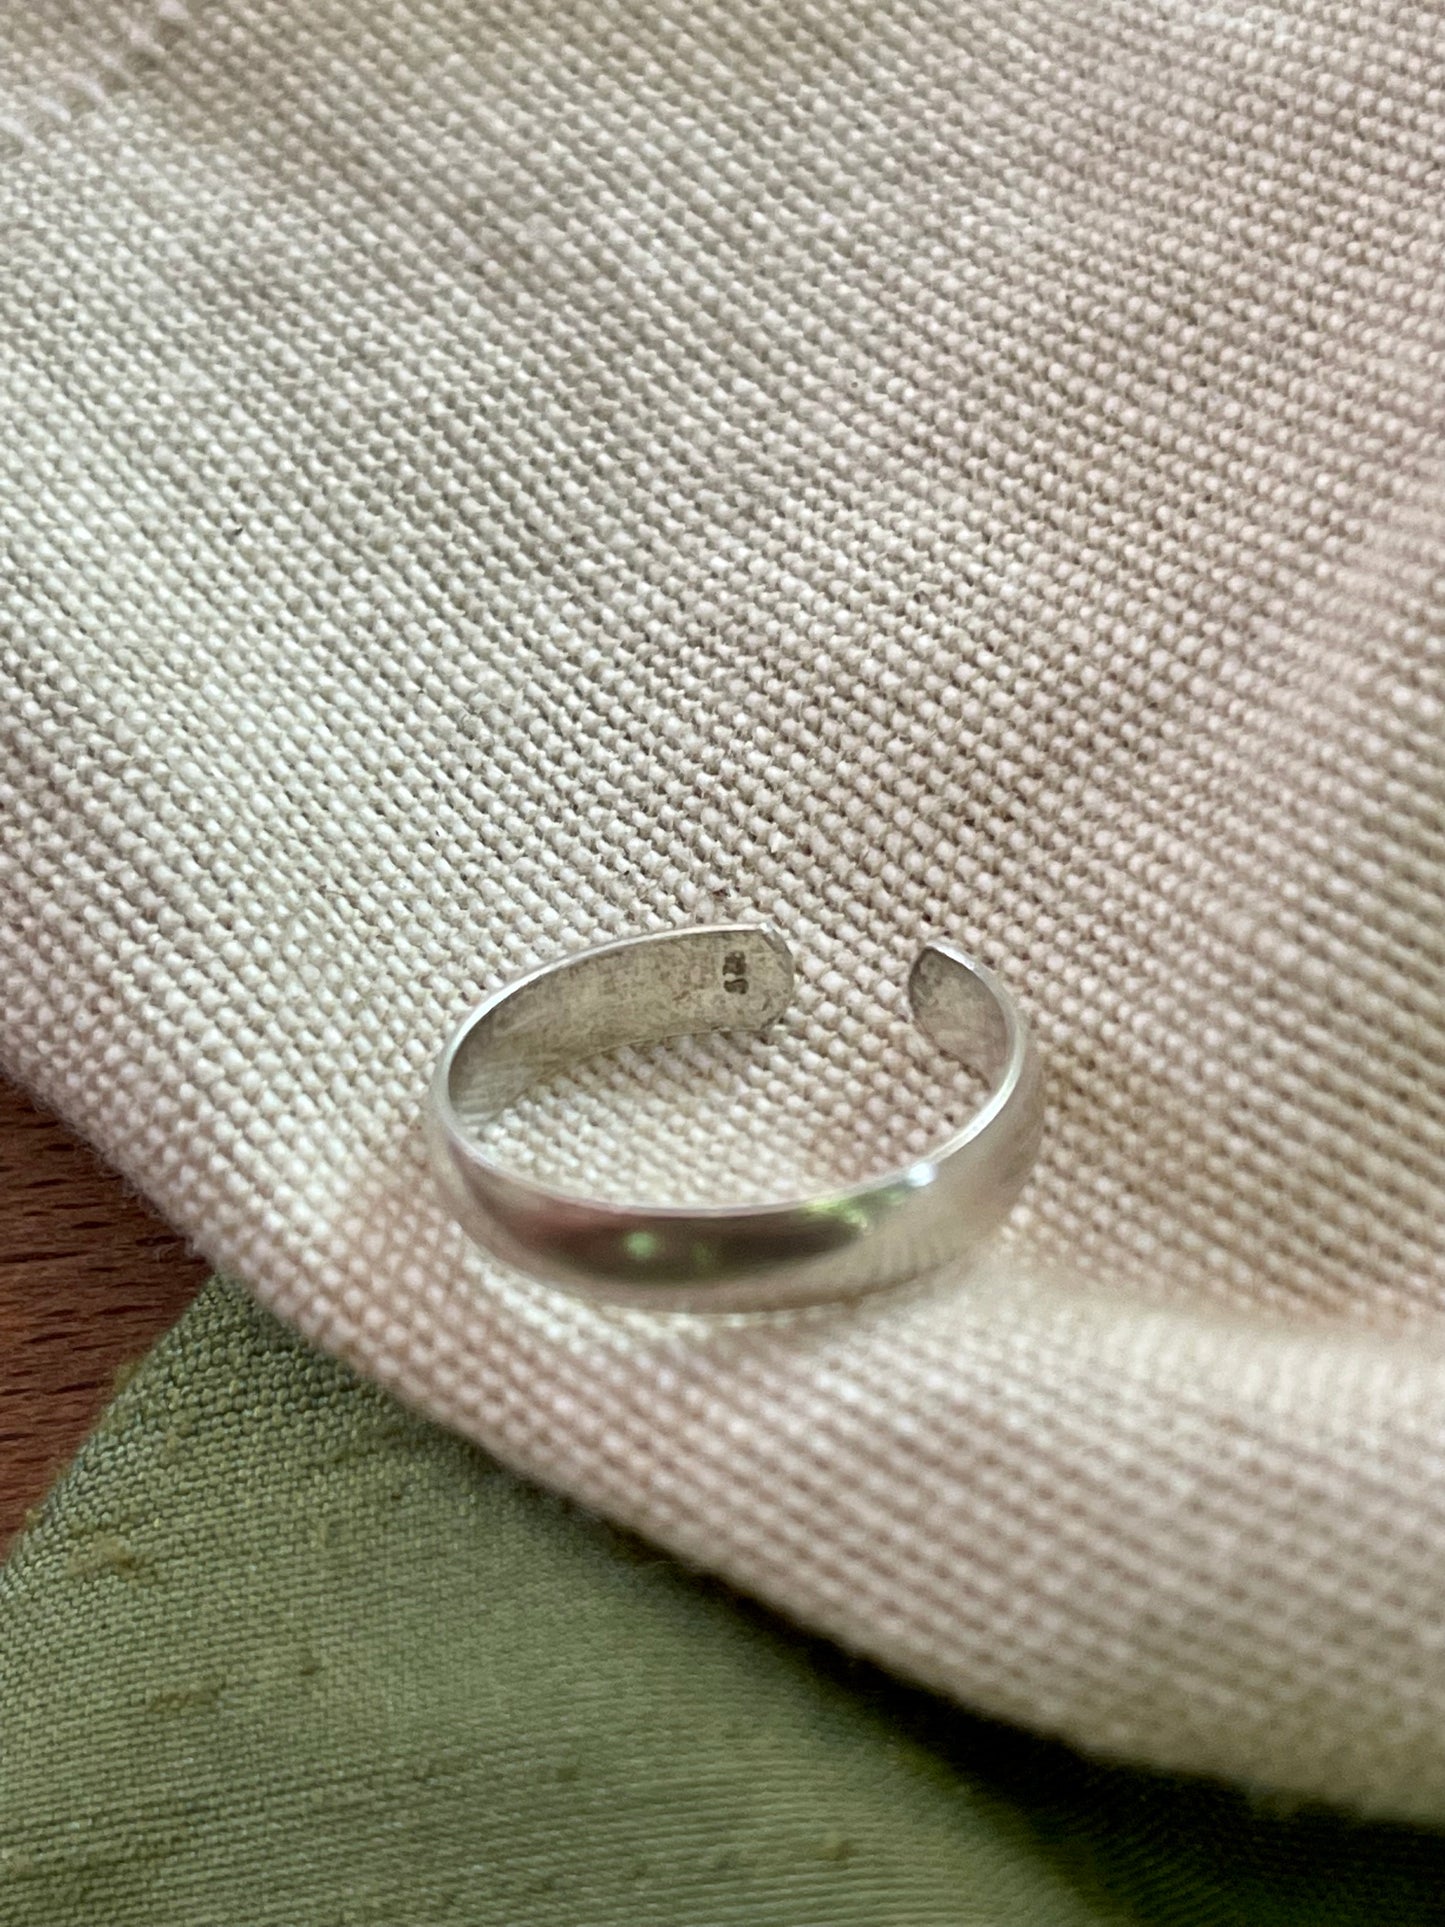 Adjustable Plain Band Solid Sterling 925 Silver Ring SIZE 5 J Jewelry Handmade